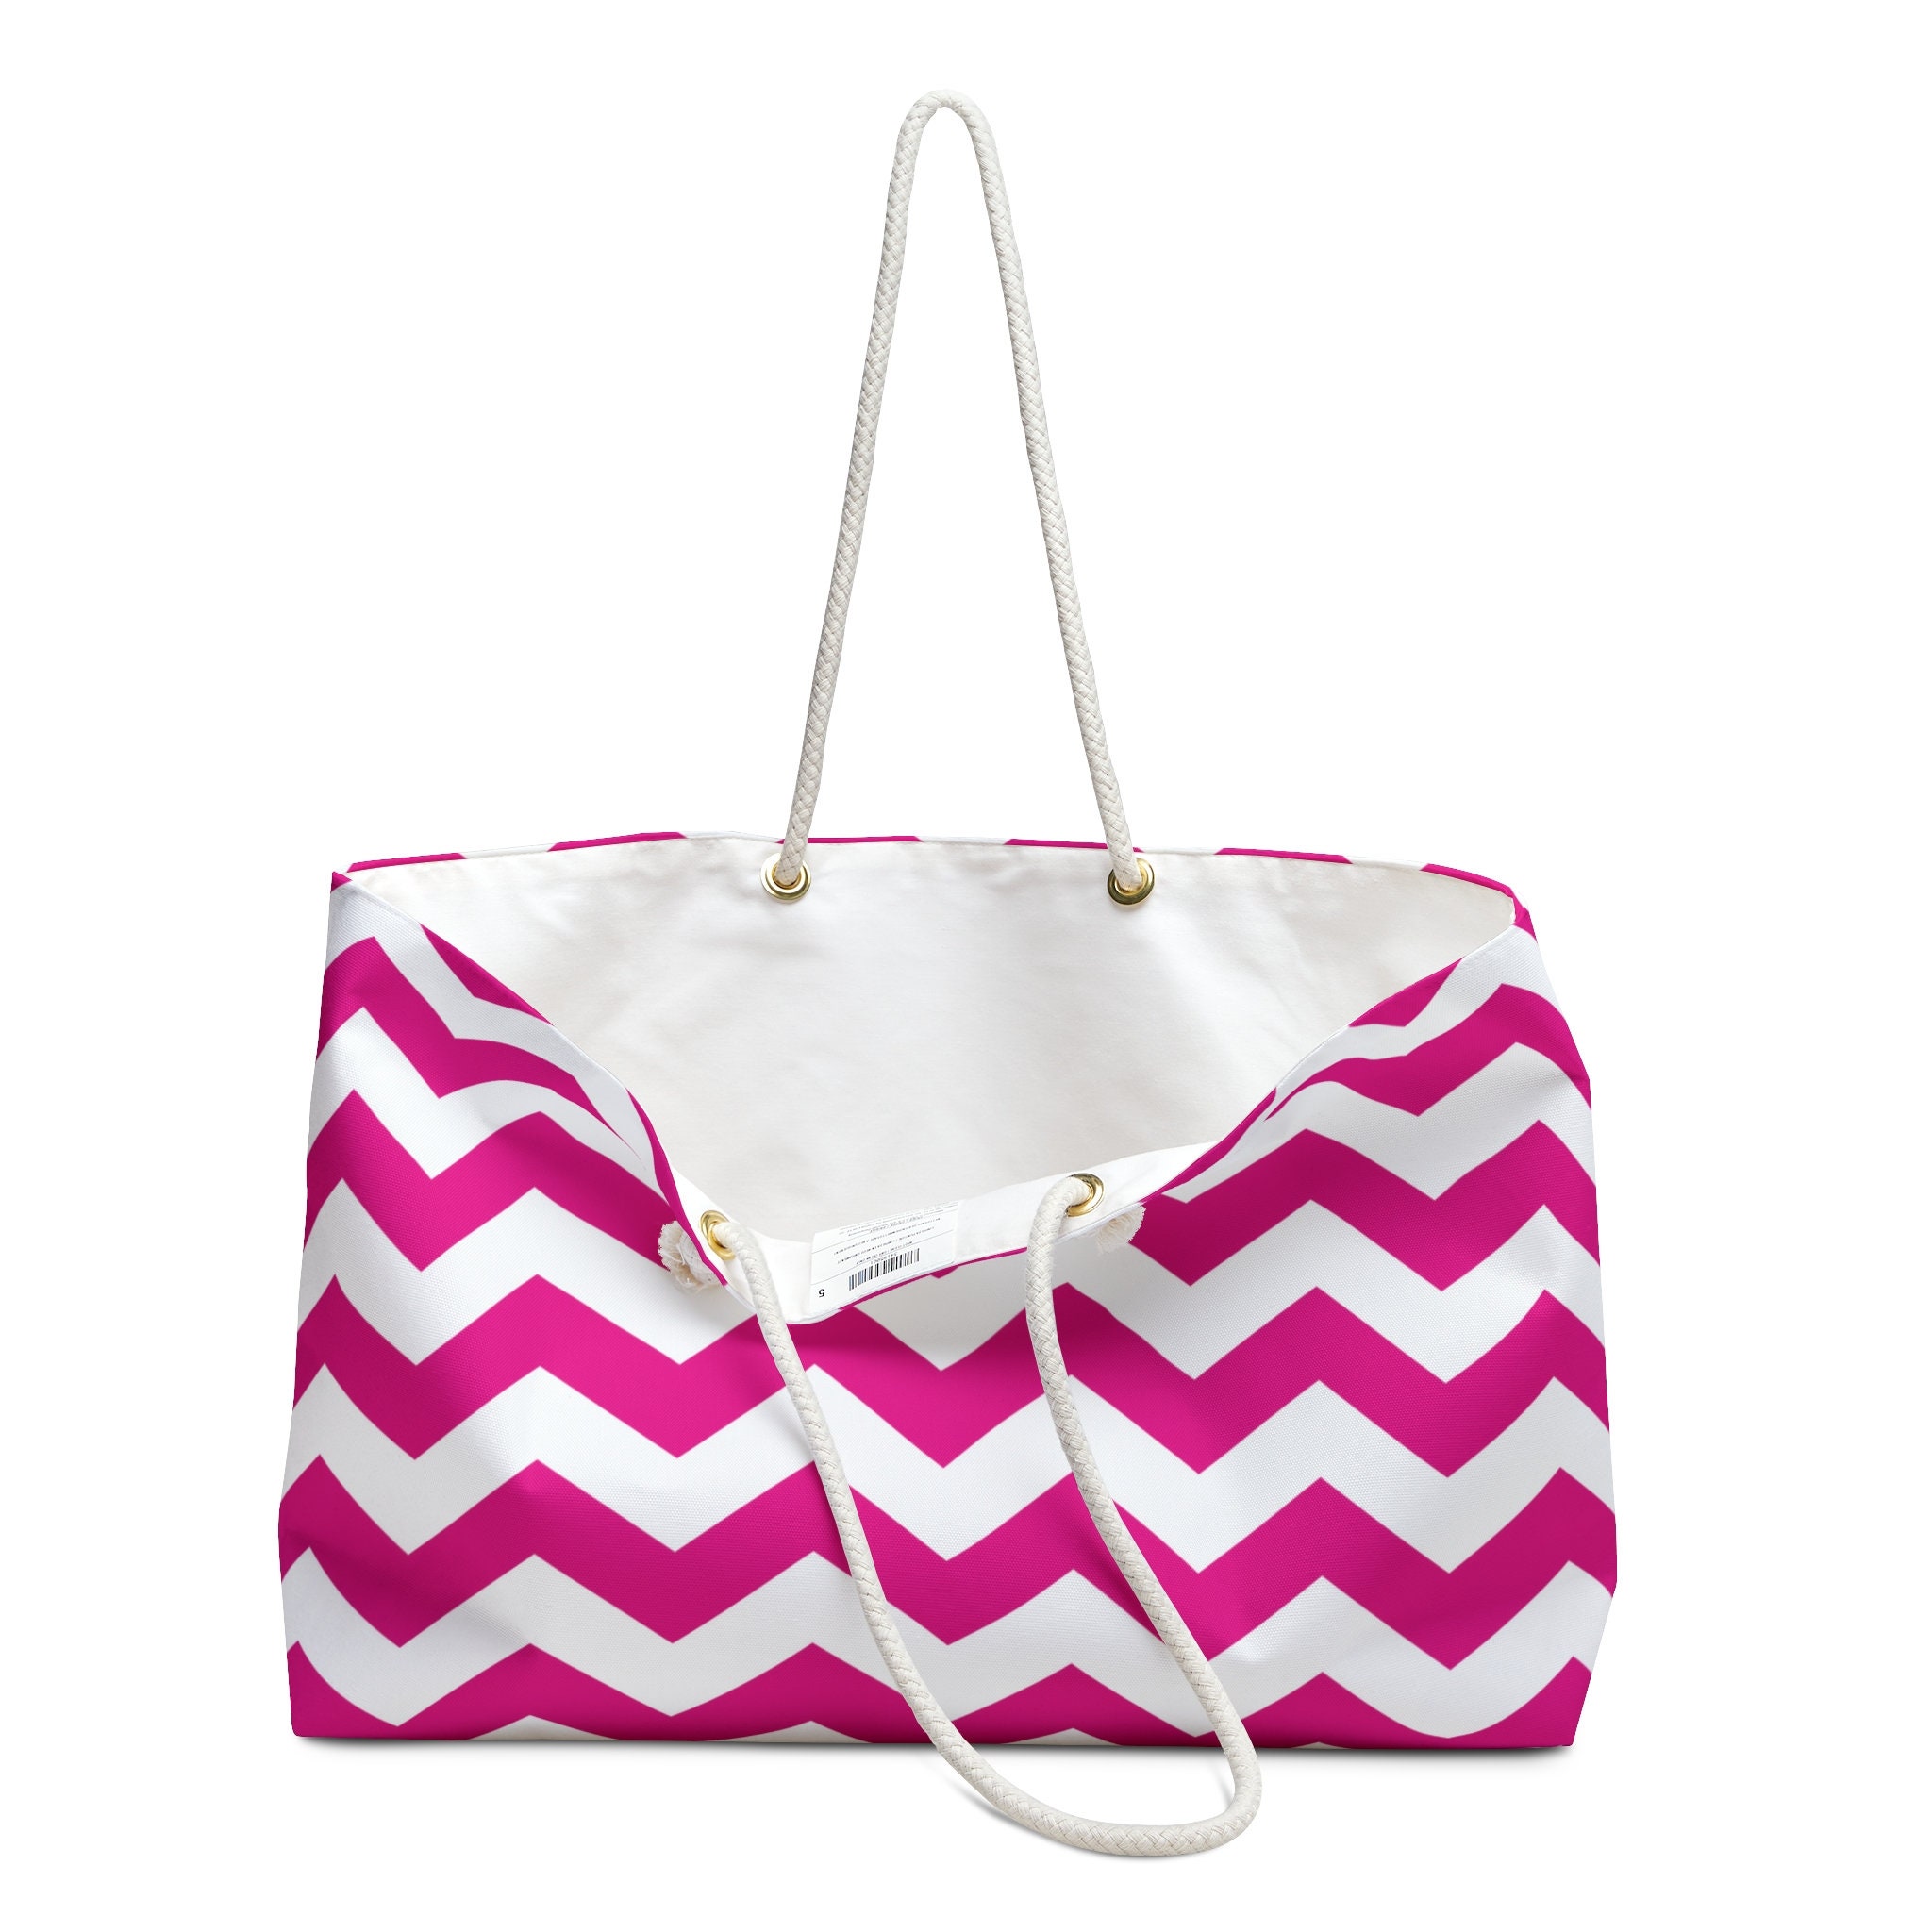 Coquette Tote Bag Weekender Bag Preppy Overnight Bridal Party